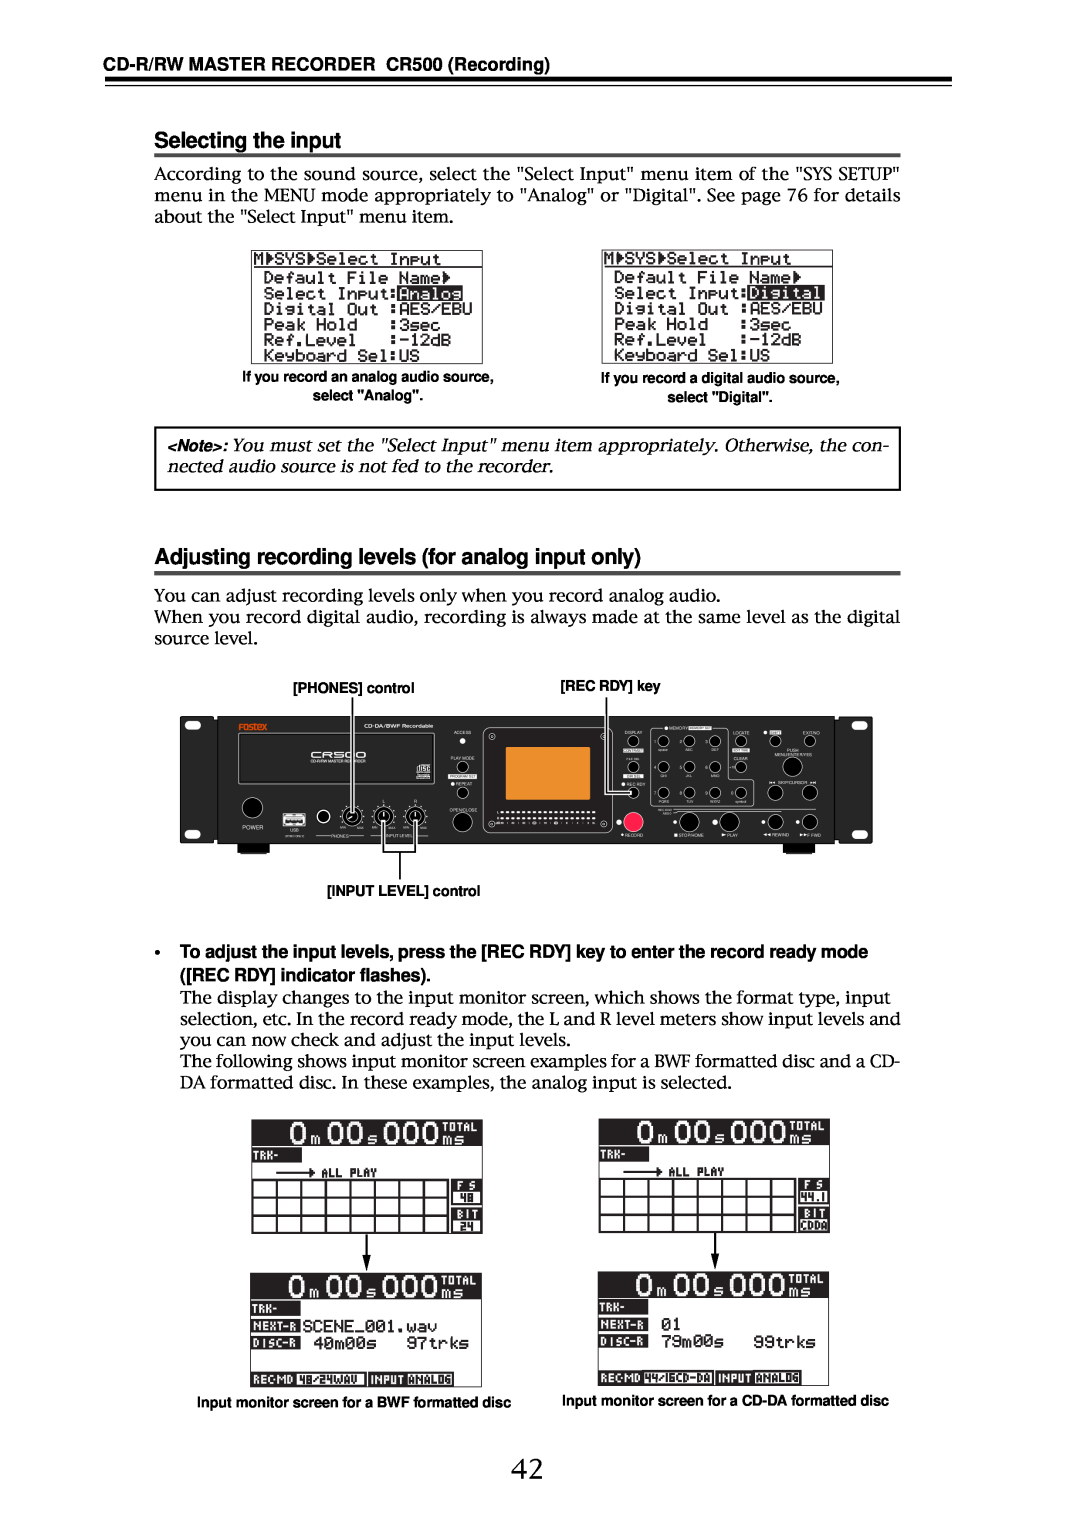 Fostex Selecting the input, Adjusting recording levels for analog input only, CD-R/RWMASTER RECORDER CR500 Recording 